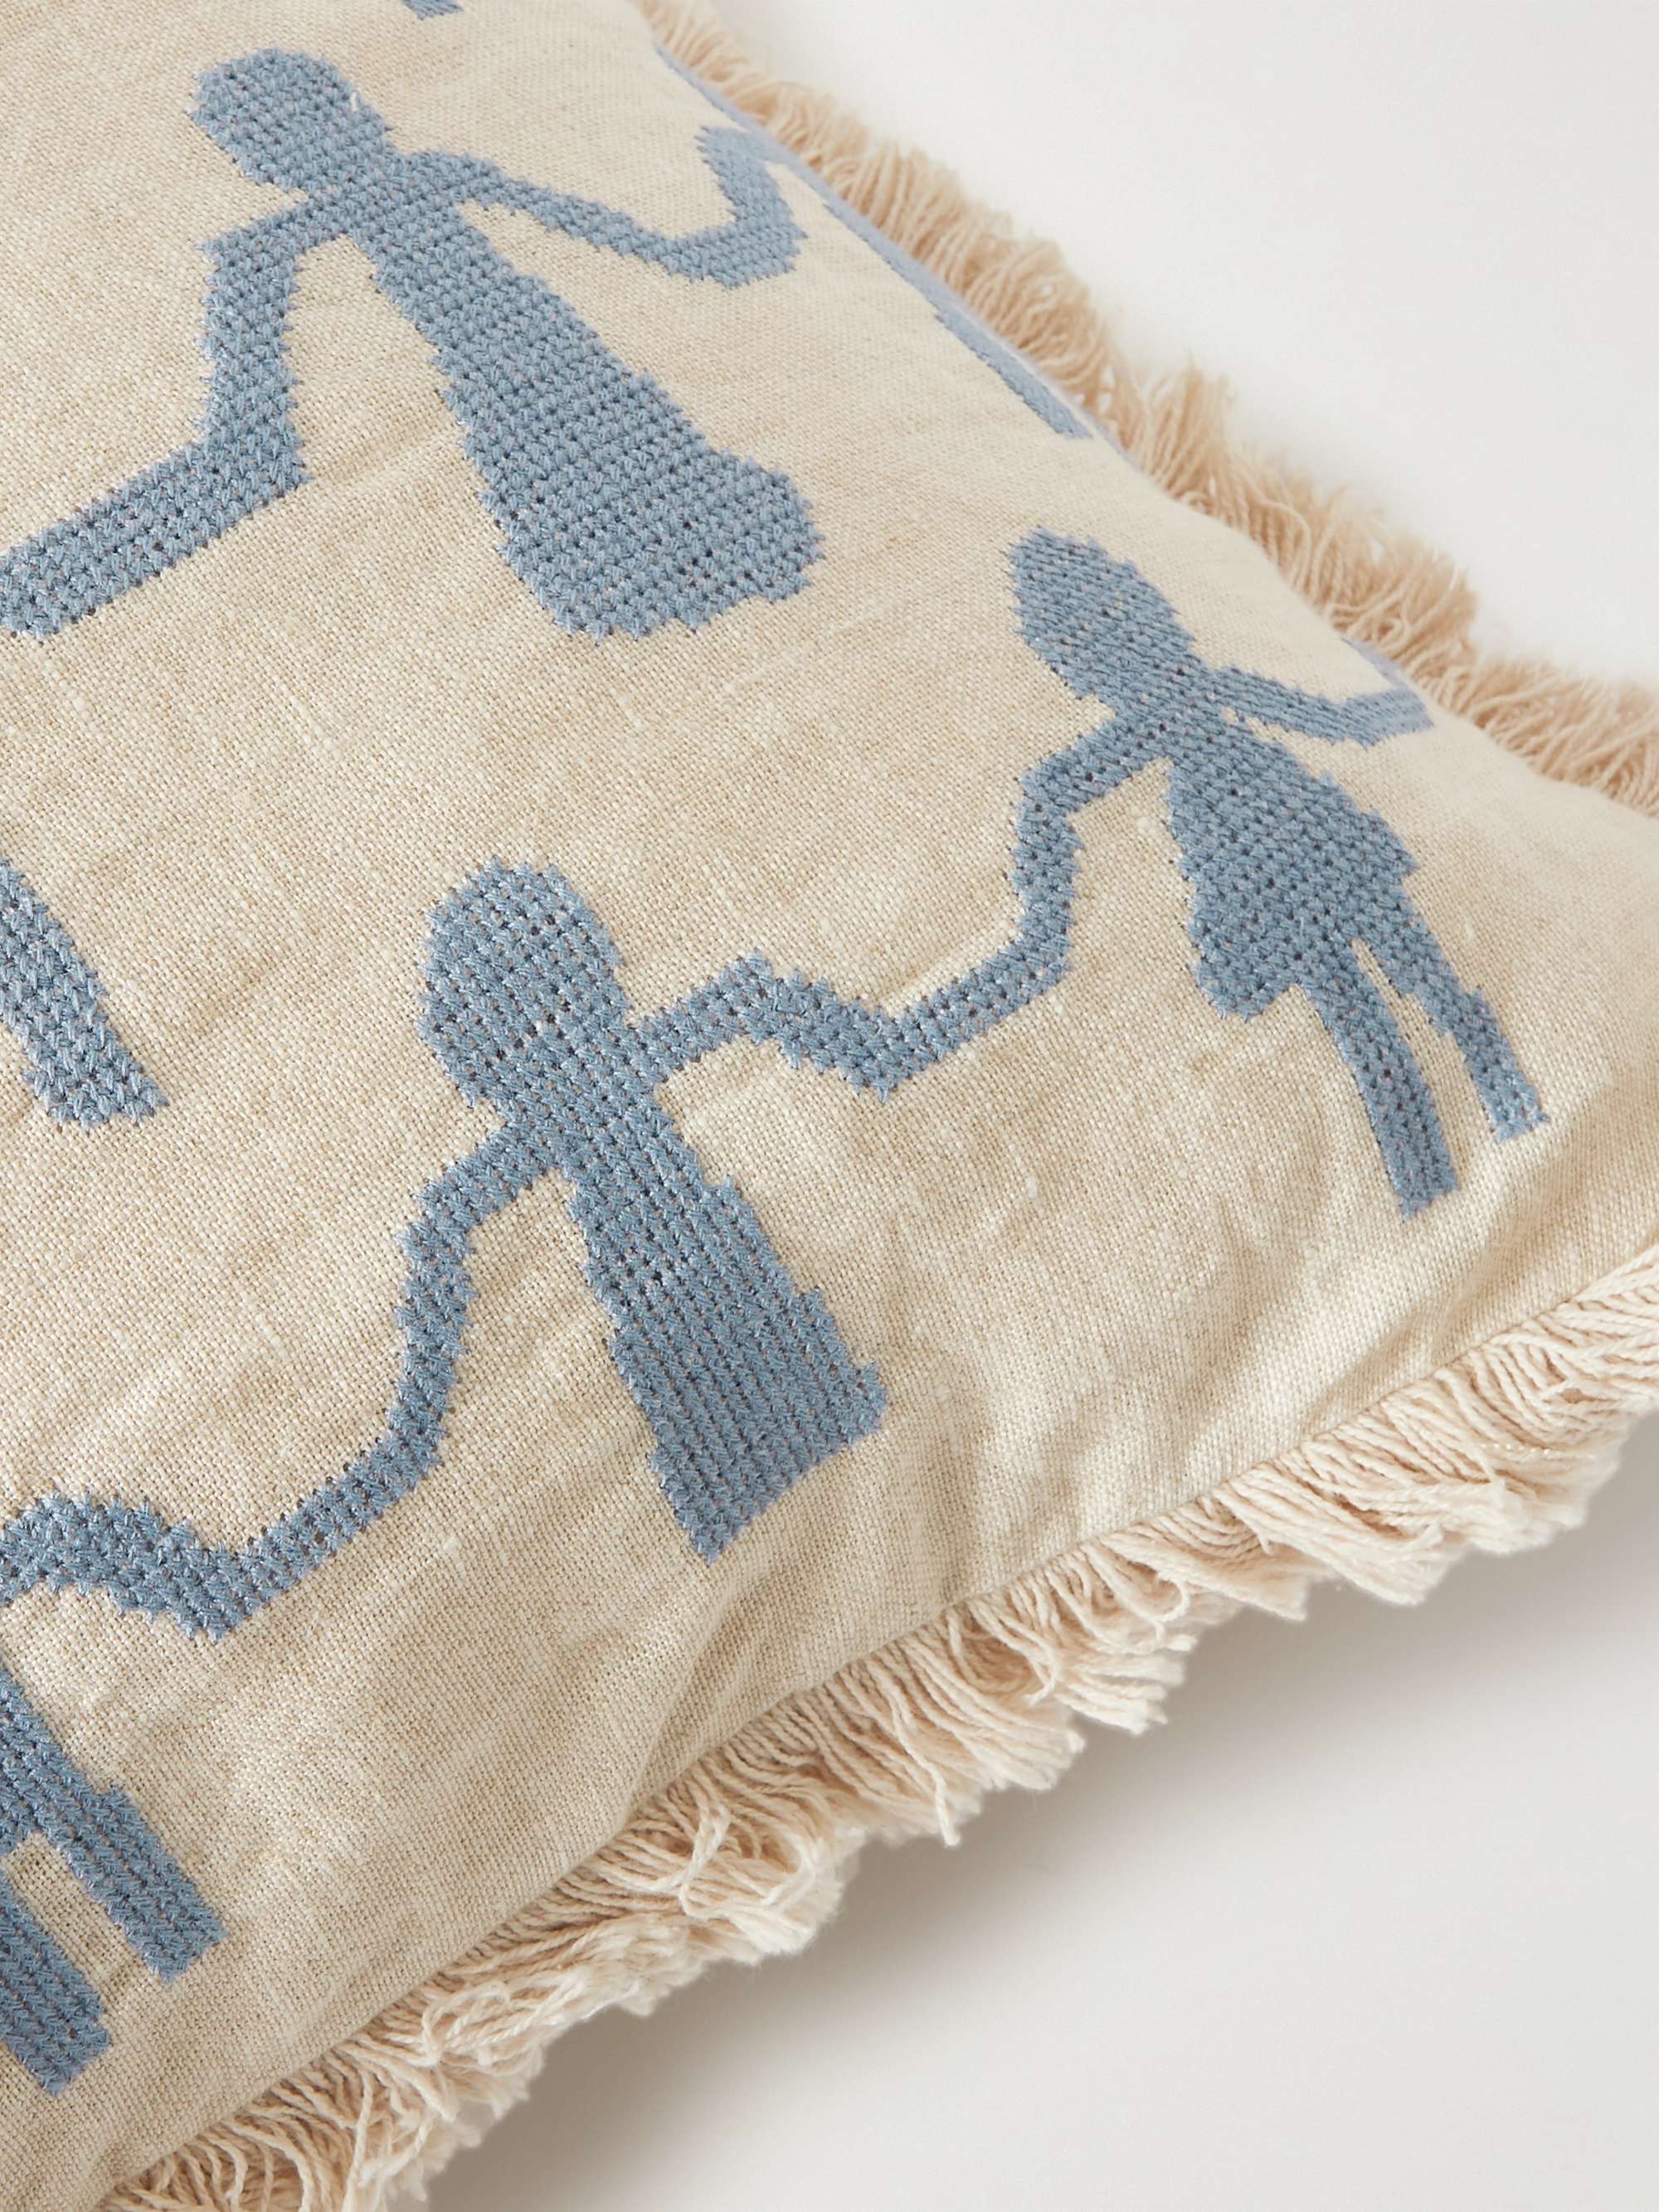 THE CONRAN SHOP Dancing Friends Fringed Embroidered Linen Cushion